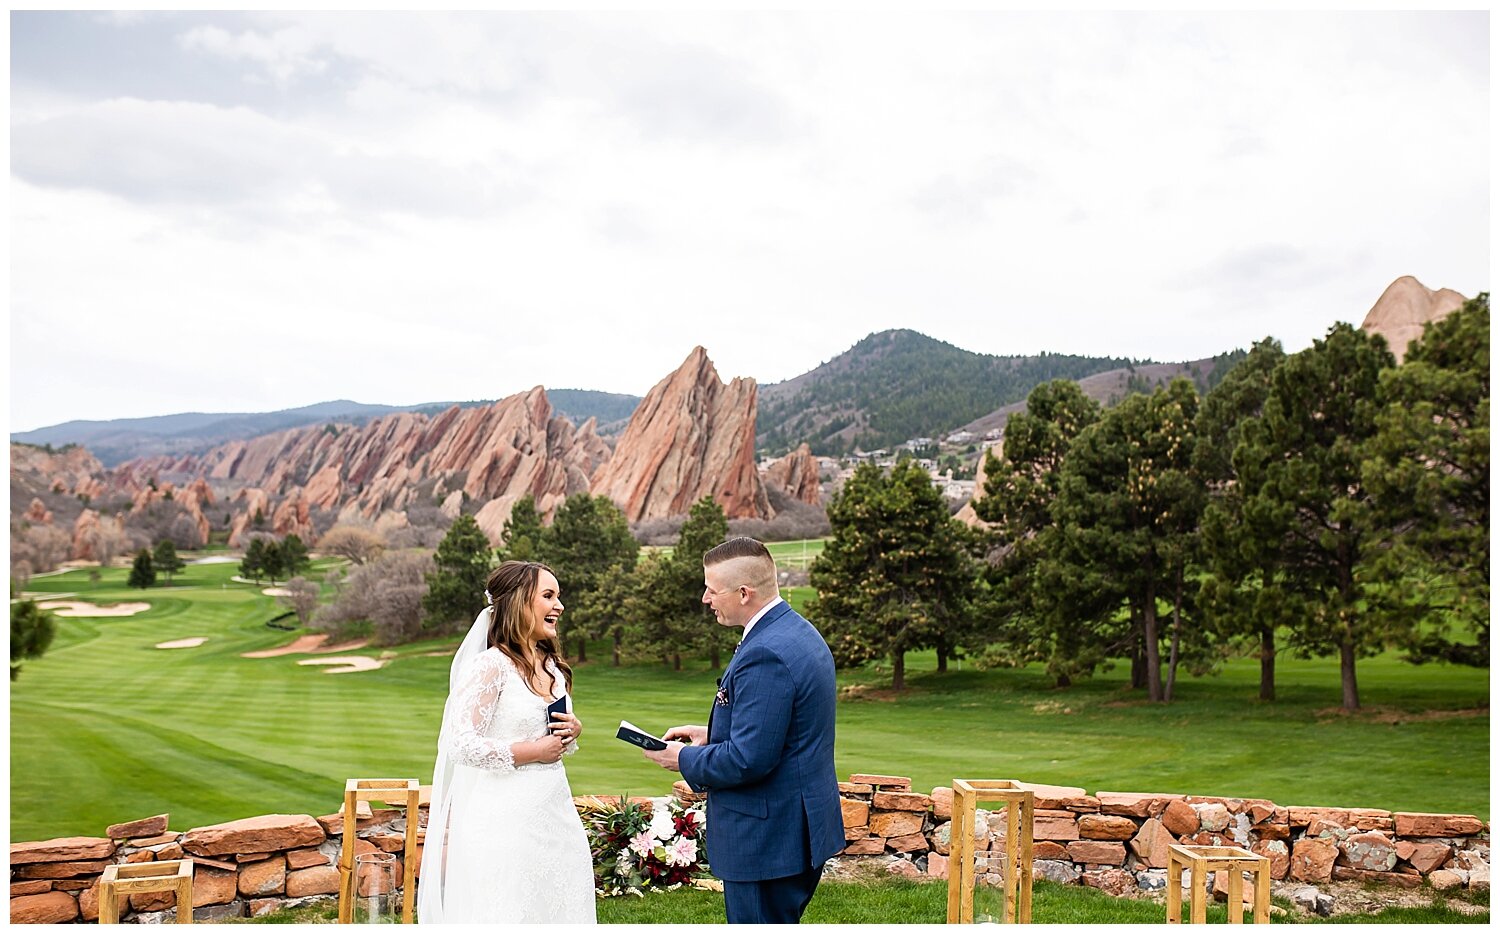 Molly and Nick's Wedding Day|Arrowhead Golf Course Elopement_0041.jpg